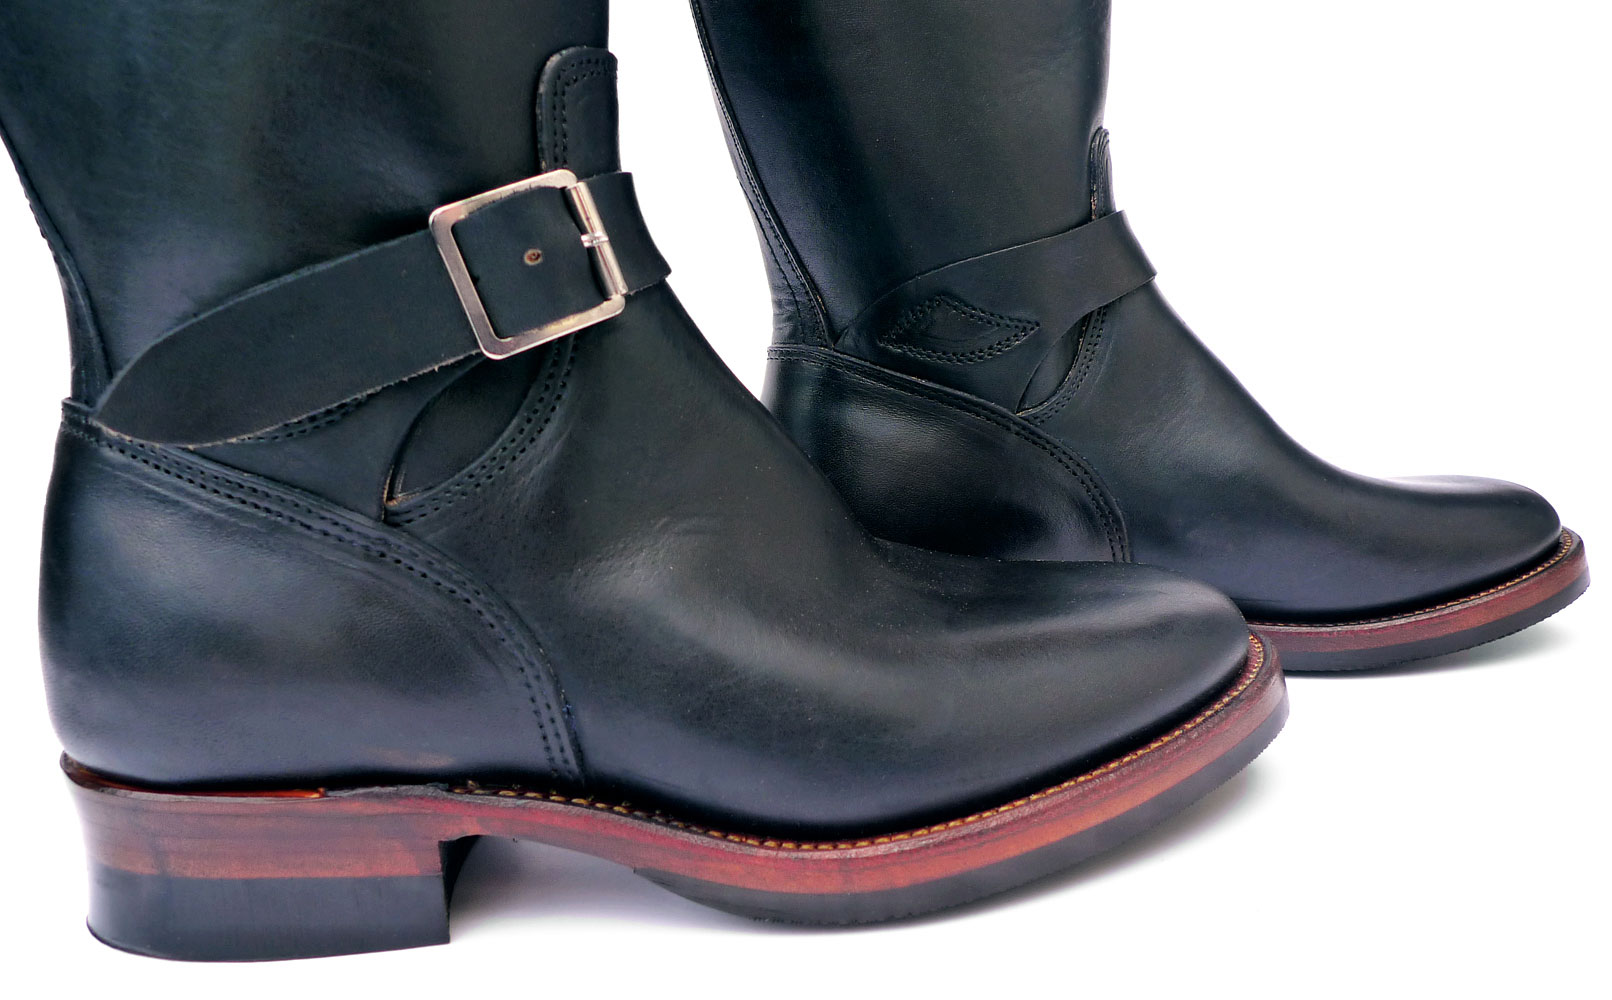 Do the Mister Freedom Black Road Champ engineer boots come in black ...